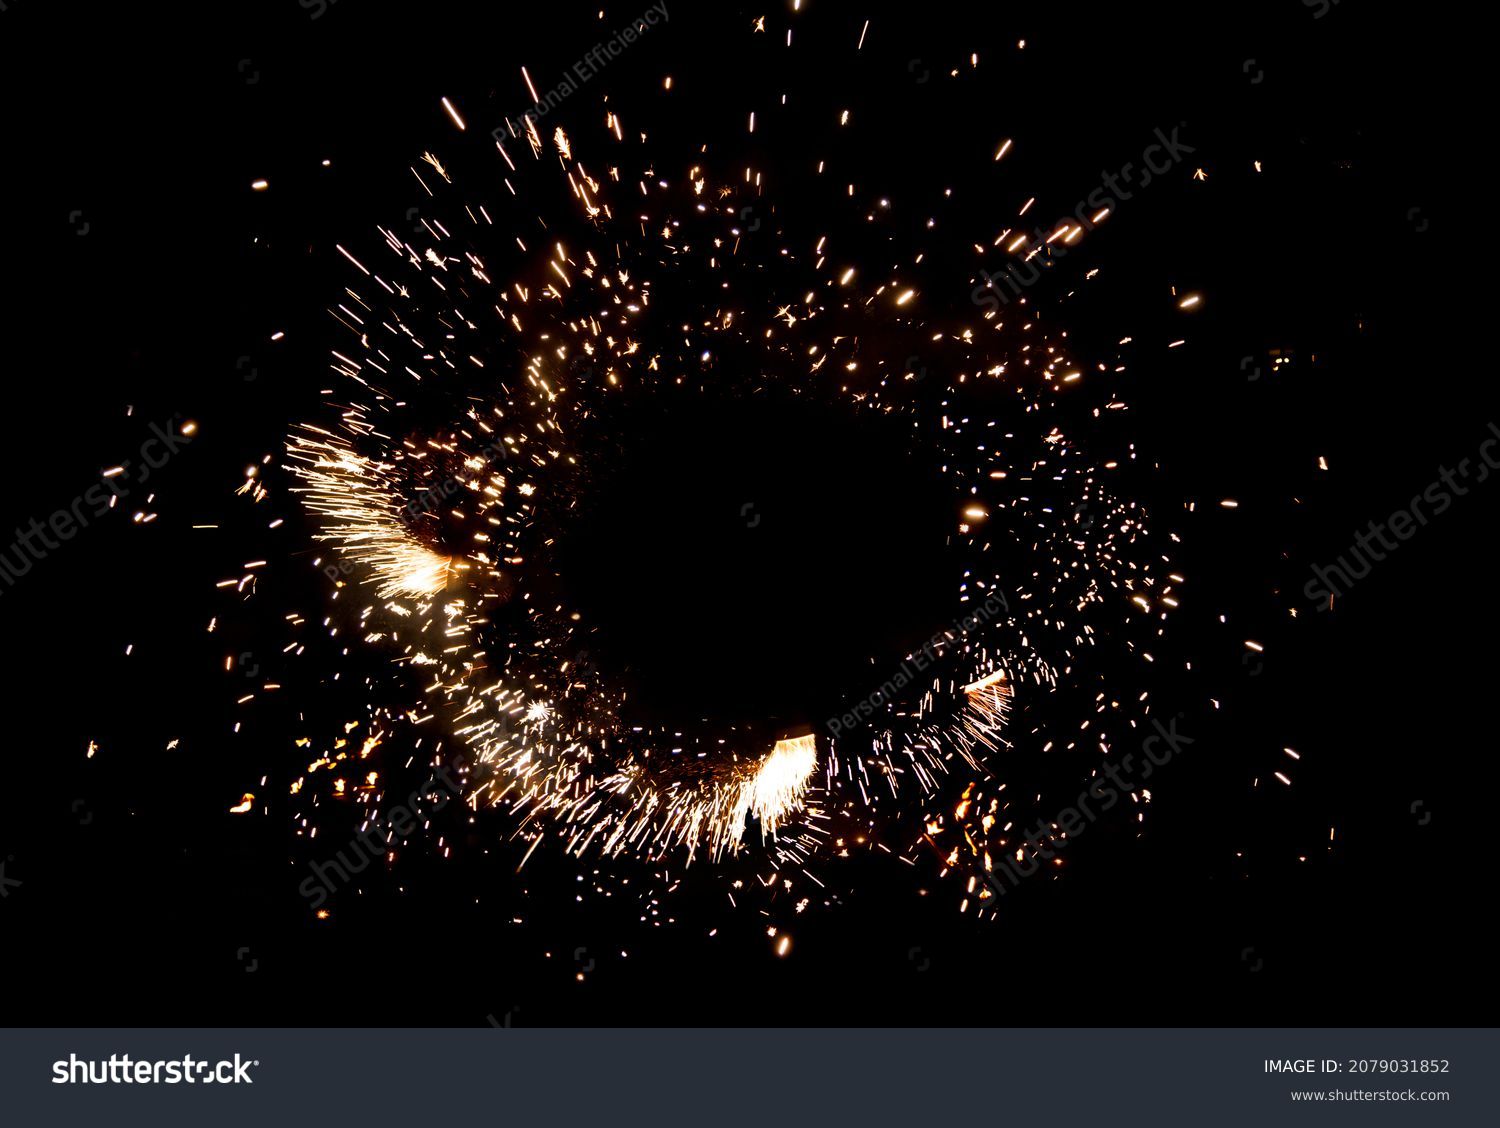 Sparkling burning frame on black background, fire show. Beautiful template for design greeting card, flyer, holiday billboard or Web banner #2079031852